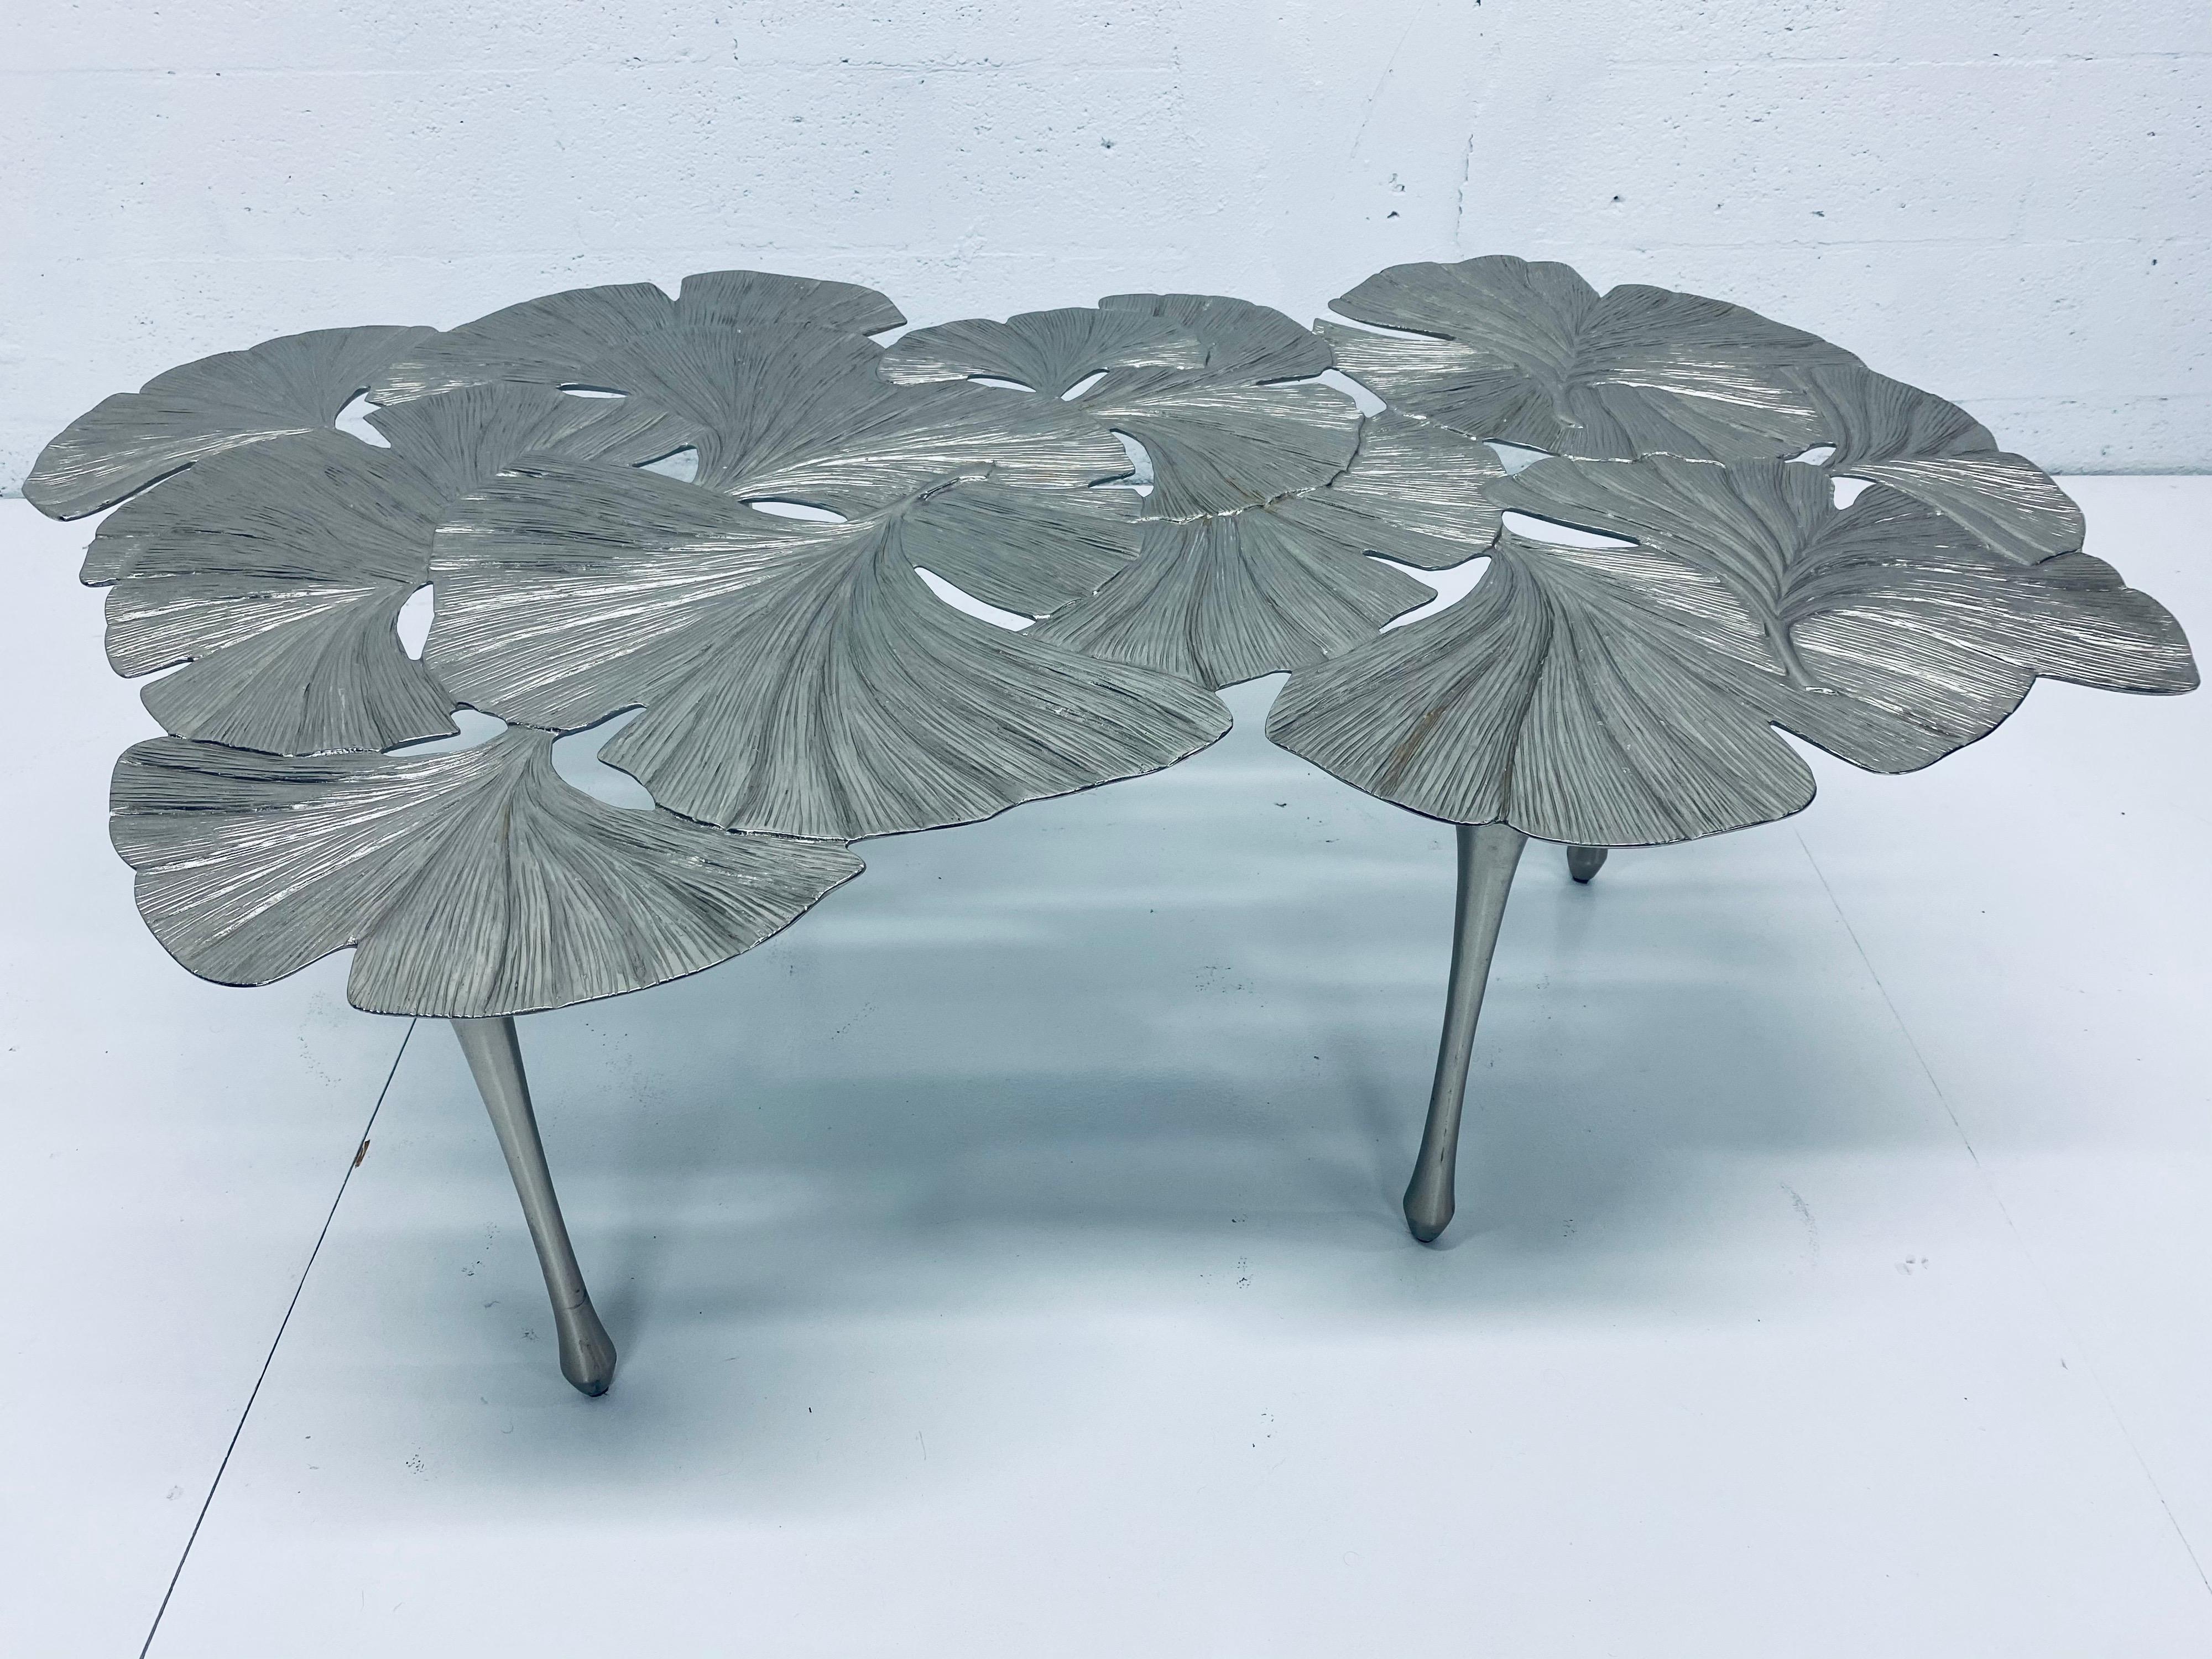 Cast aluminum Ginko Leaf pattern top coffee table with satin nickel finish by Bernhardt Interiors. Part of the Annabella Collection.